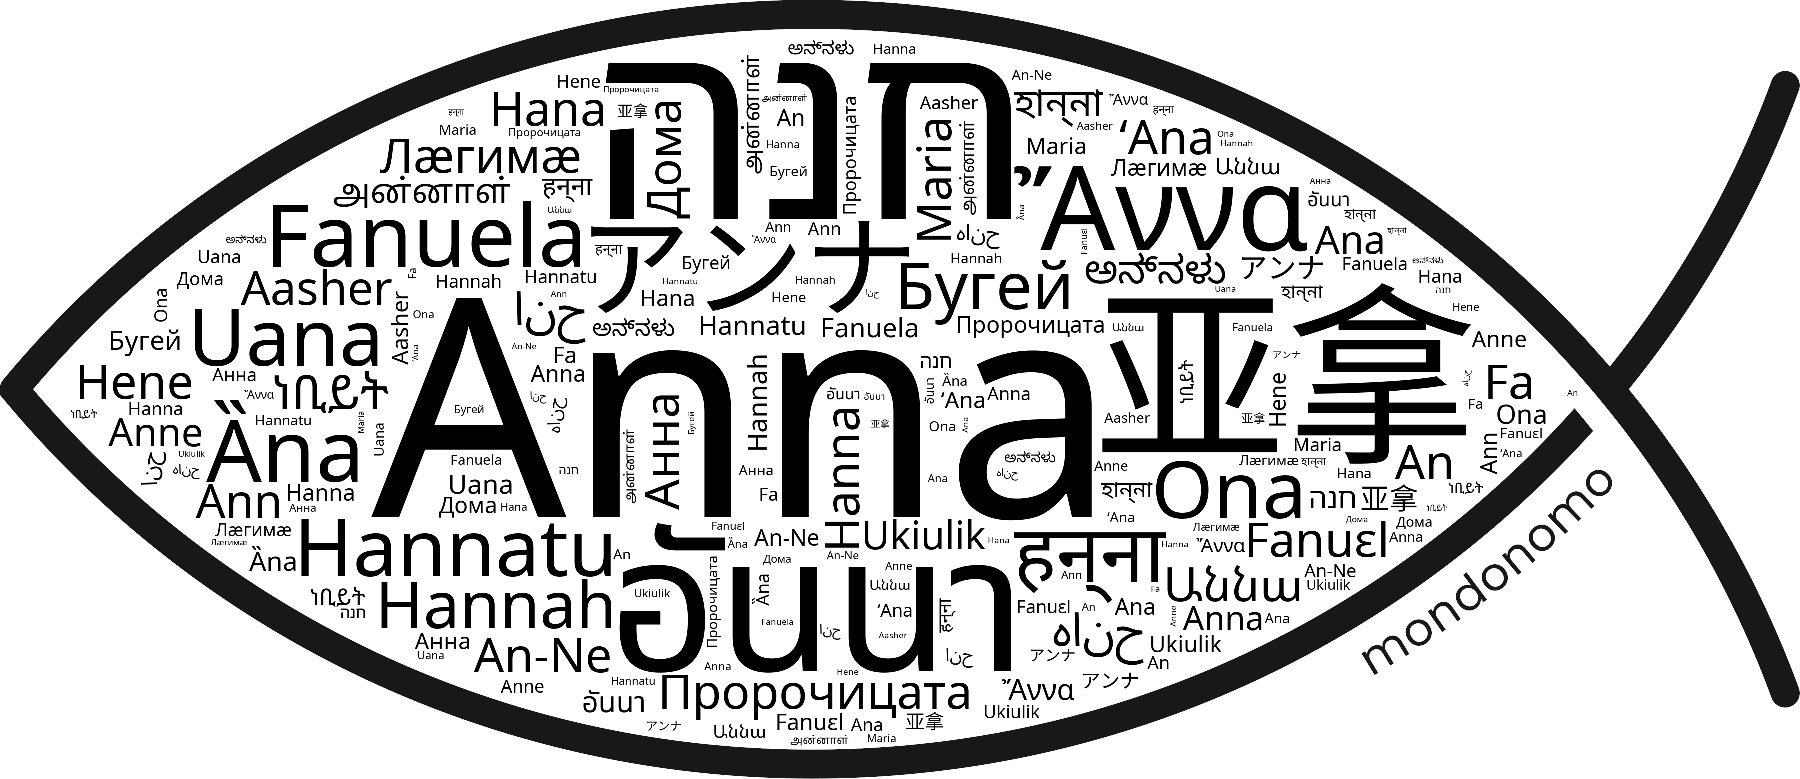 Name Anna in the world's Bibles